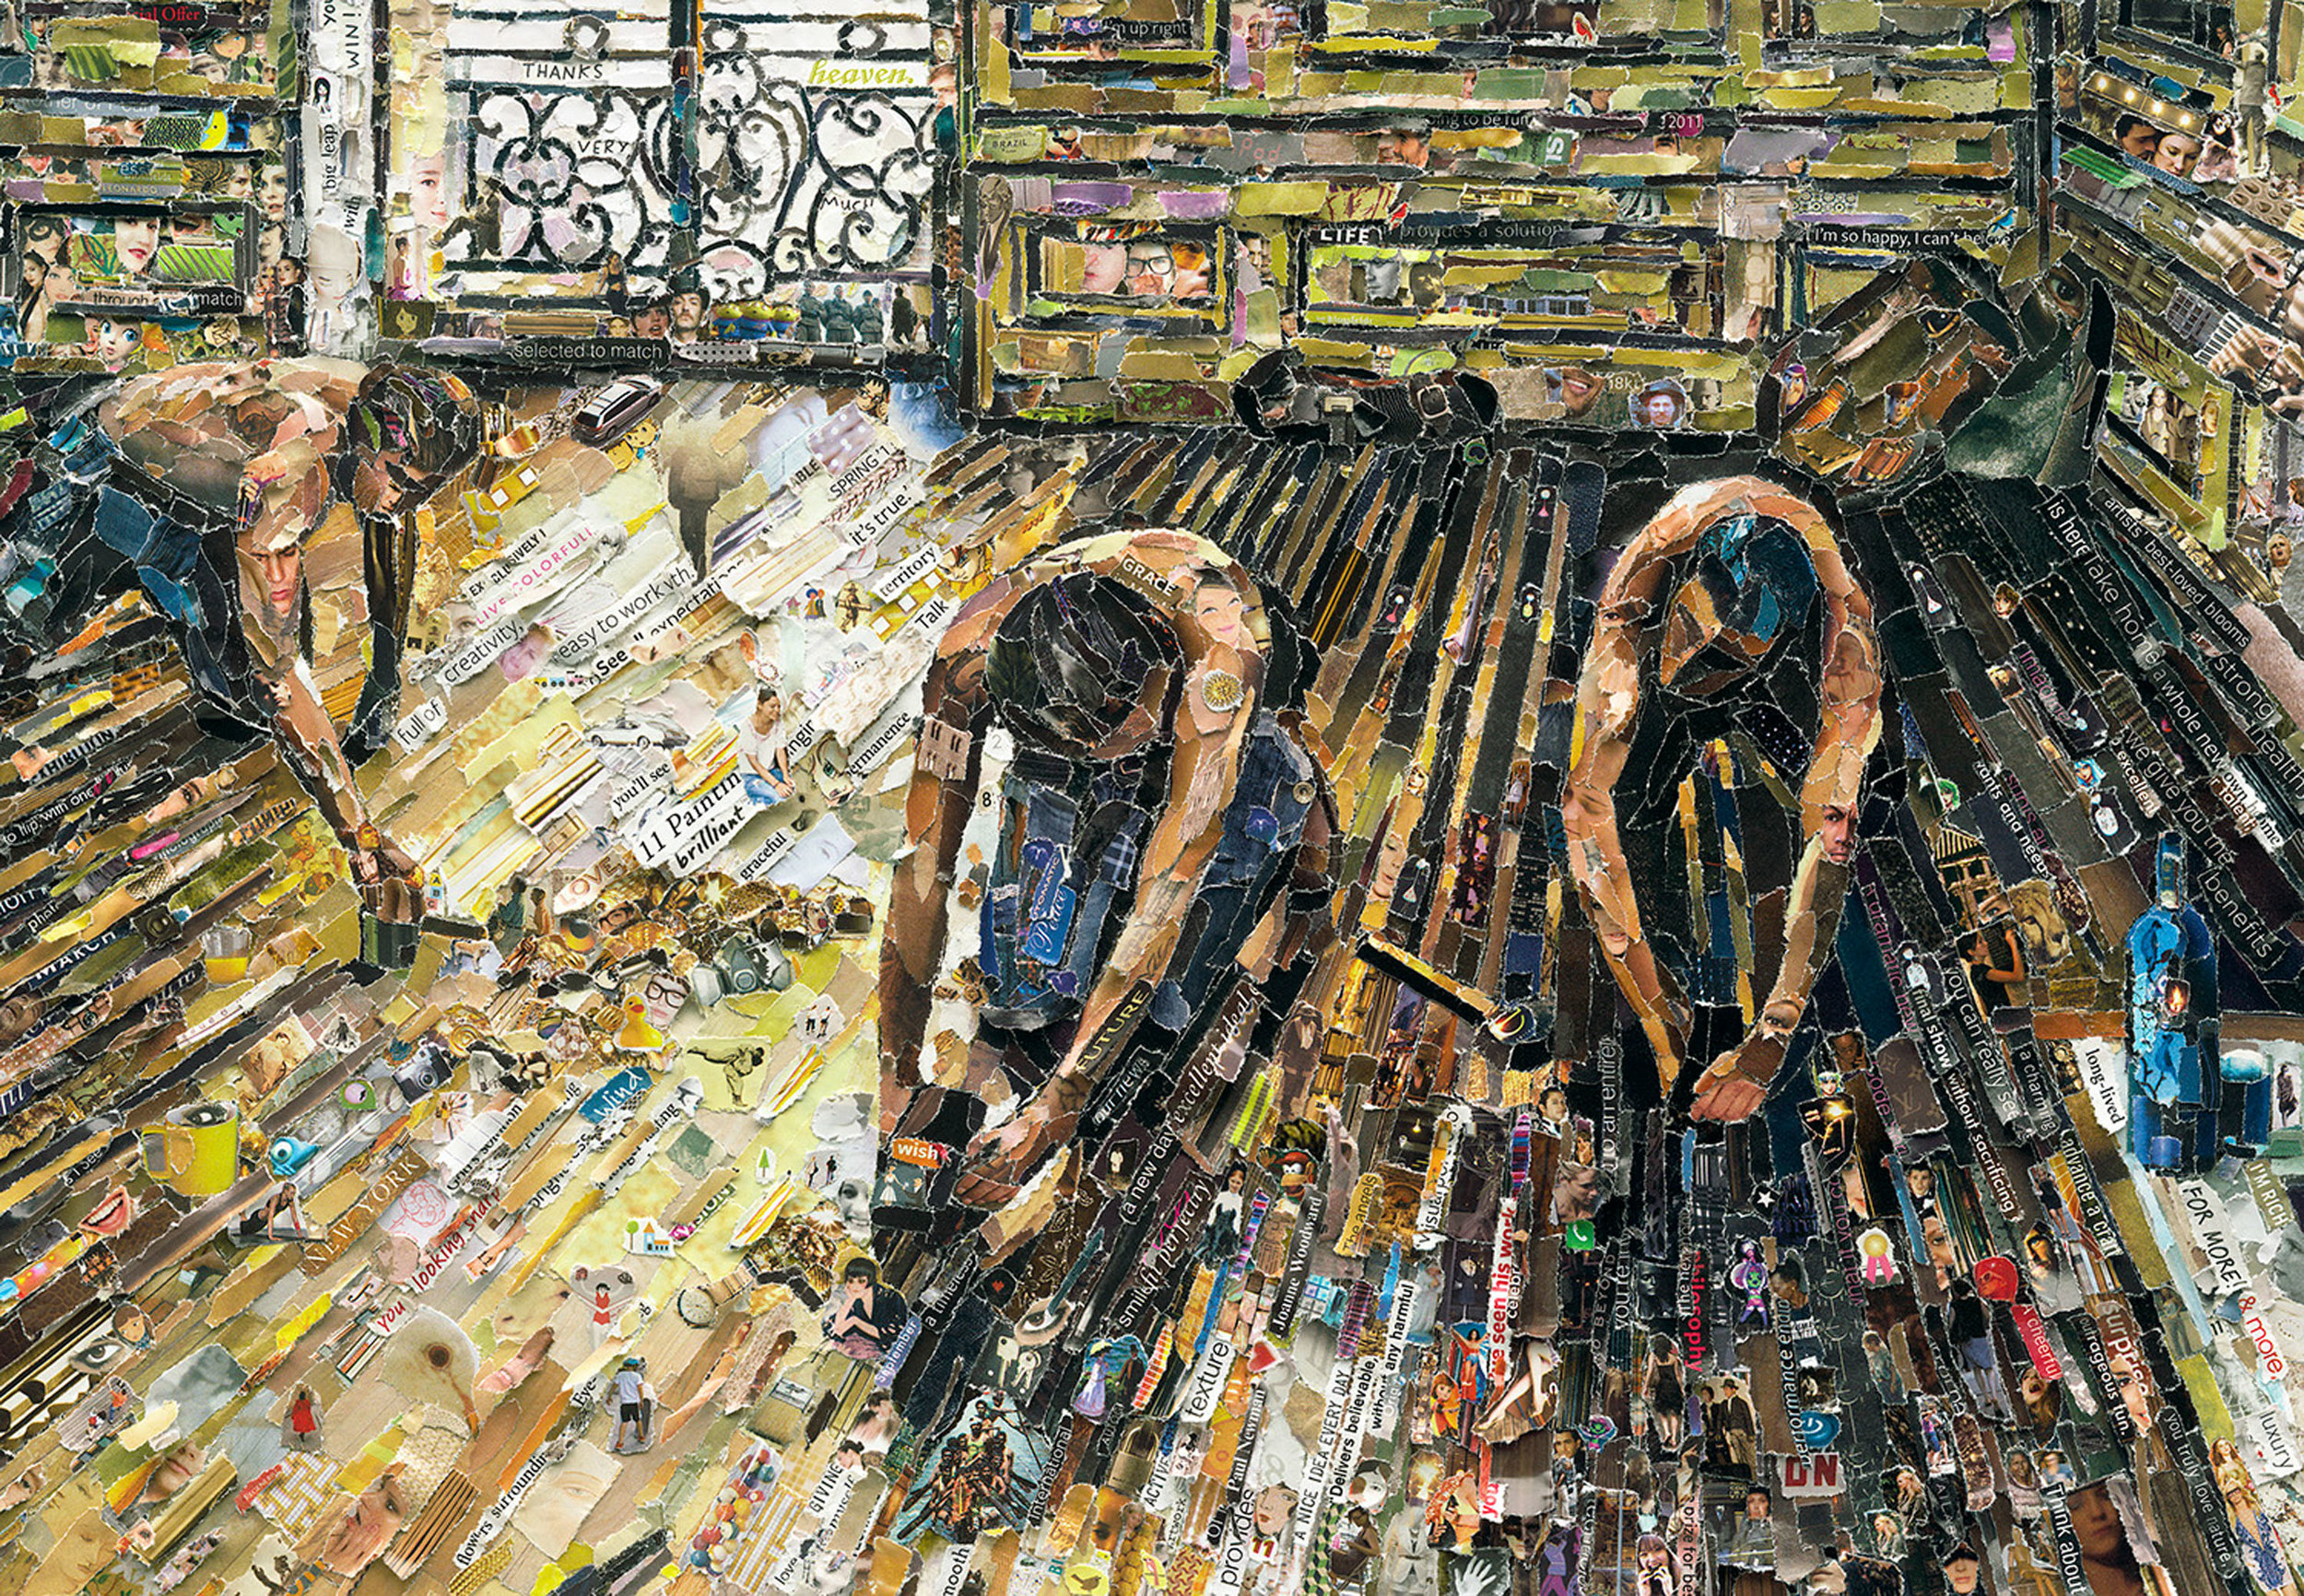 Floor Scrapers, after Gustave Caillebotte (Pictures of Magazines 2)